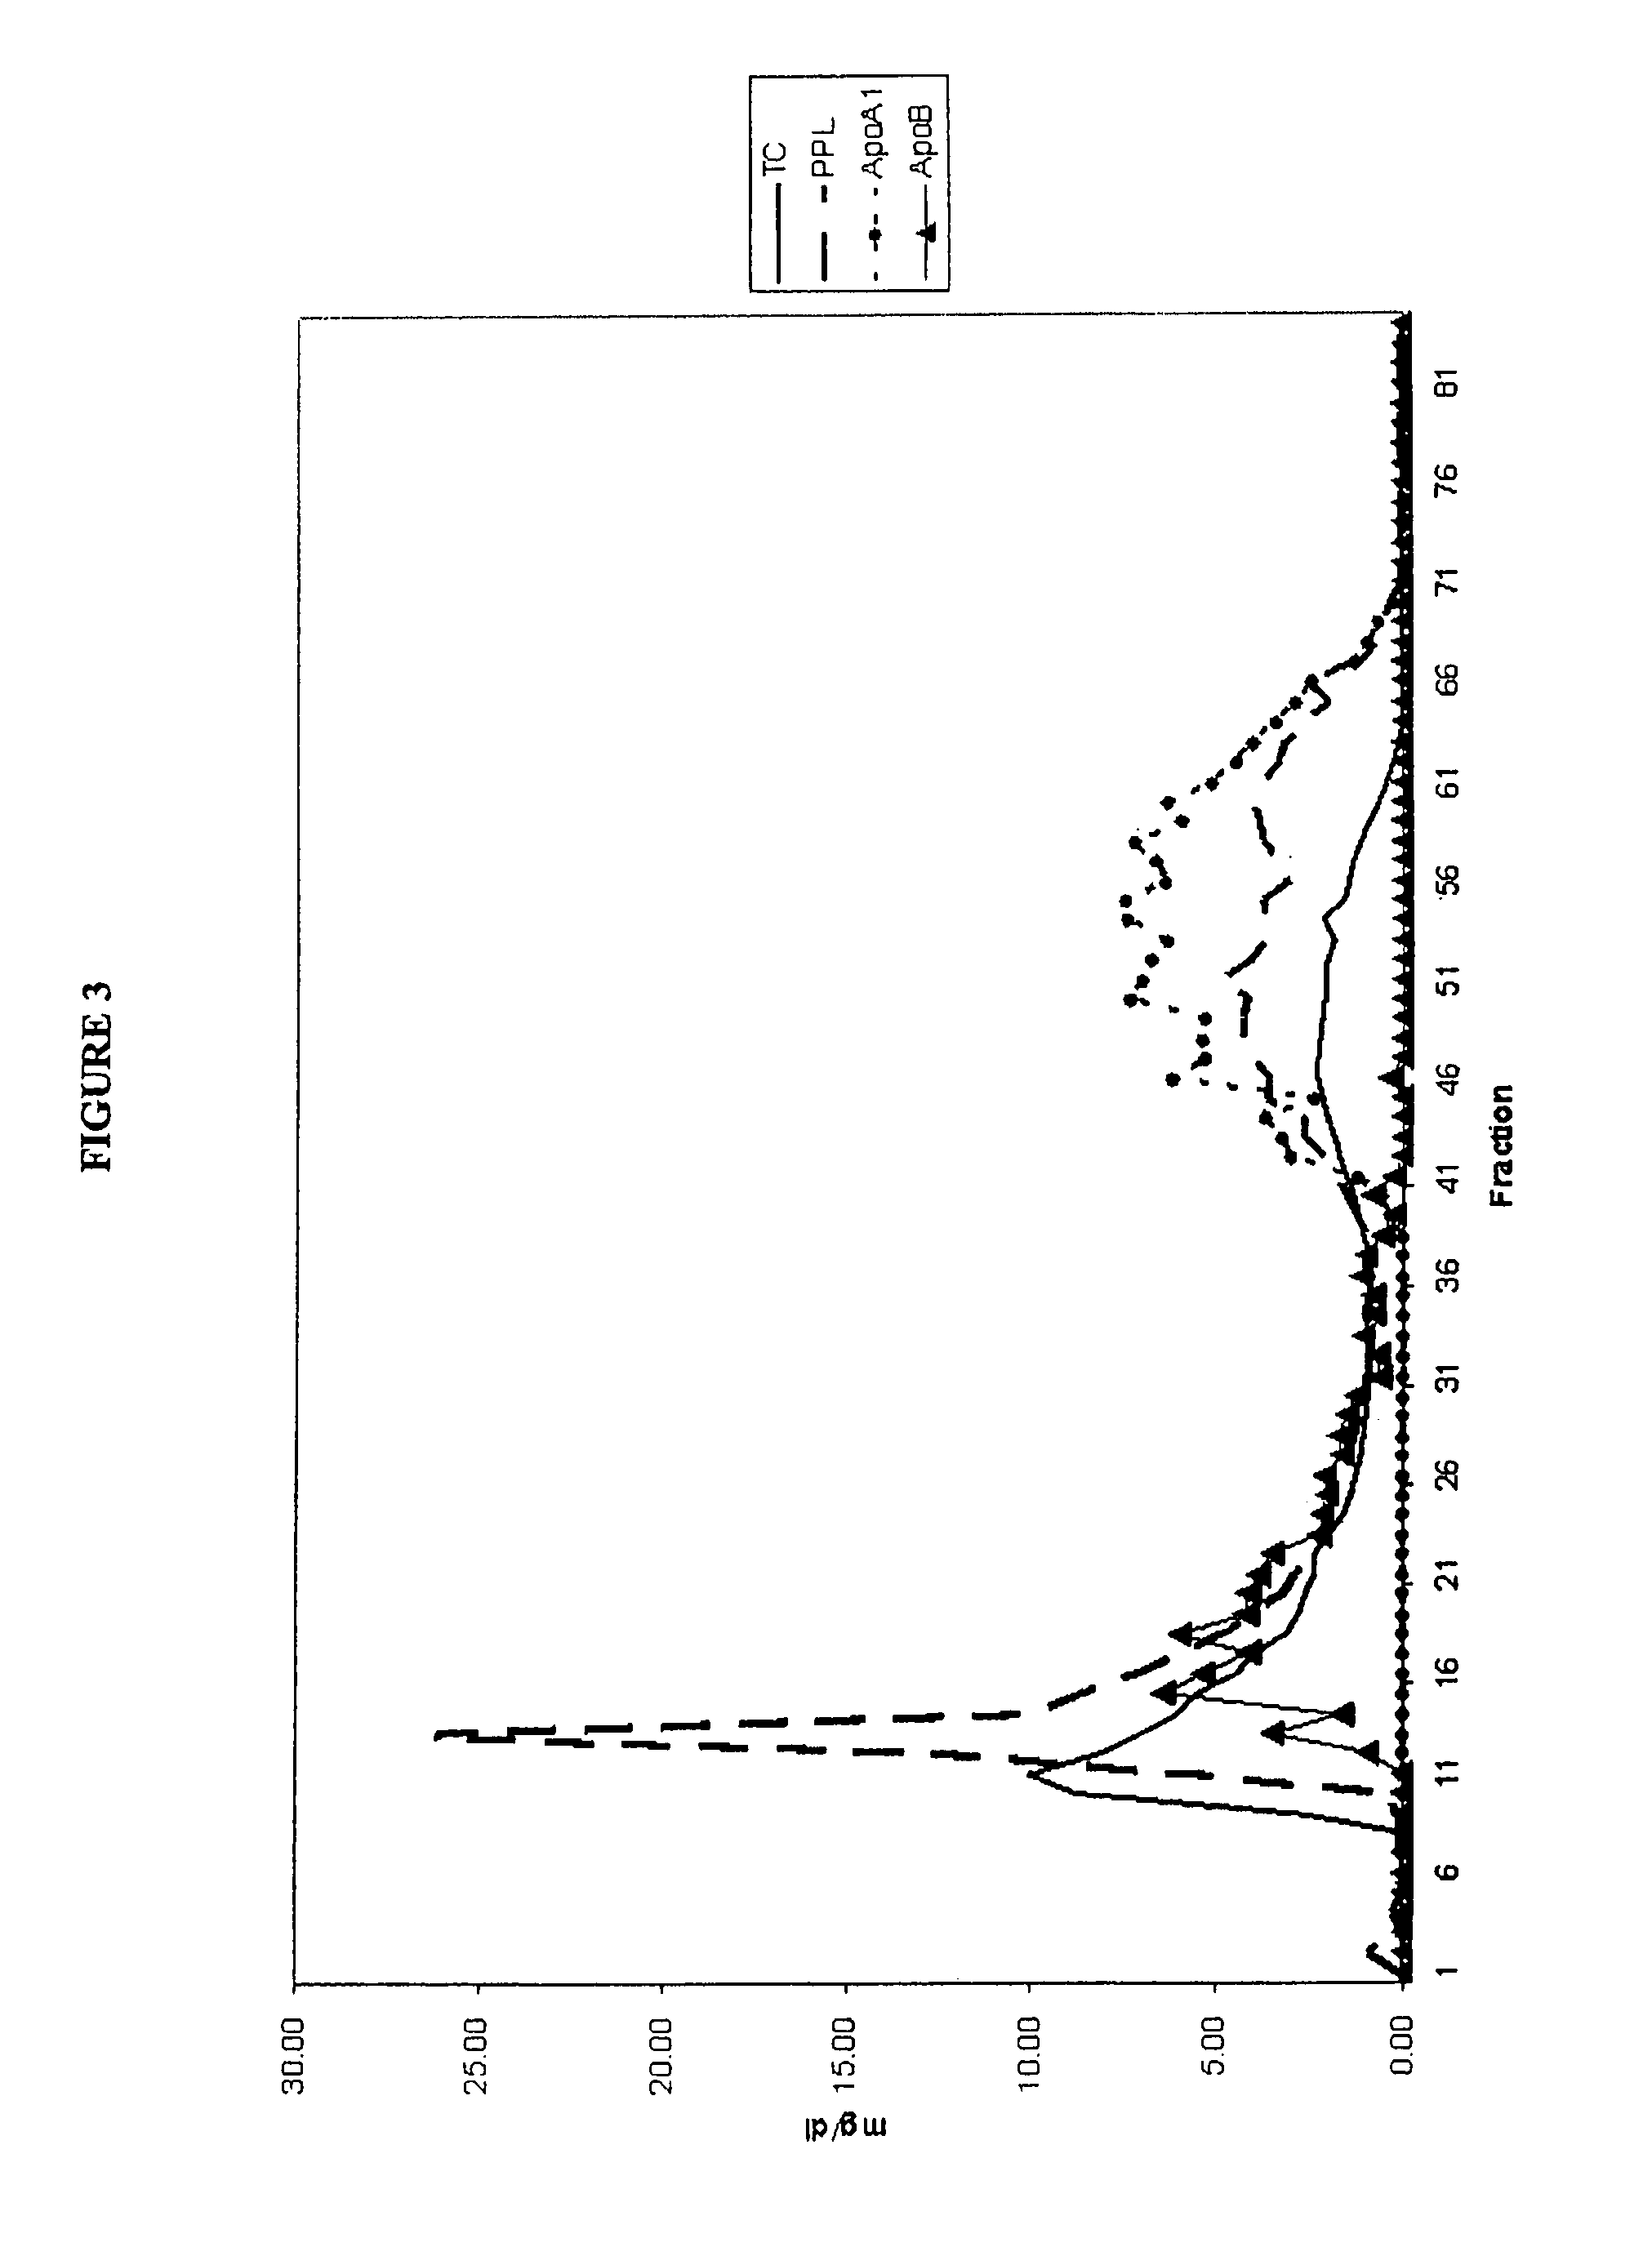 Methods and apparatus for creating particle derivatives of HDL with reduced lipid content